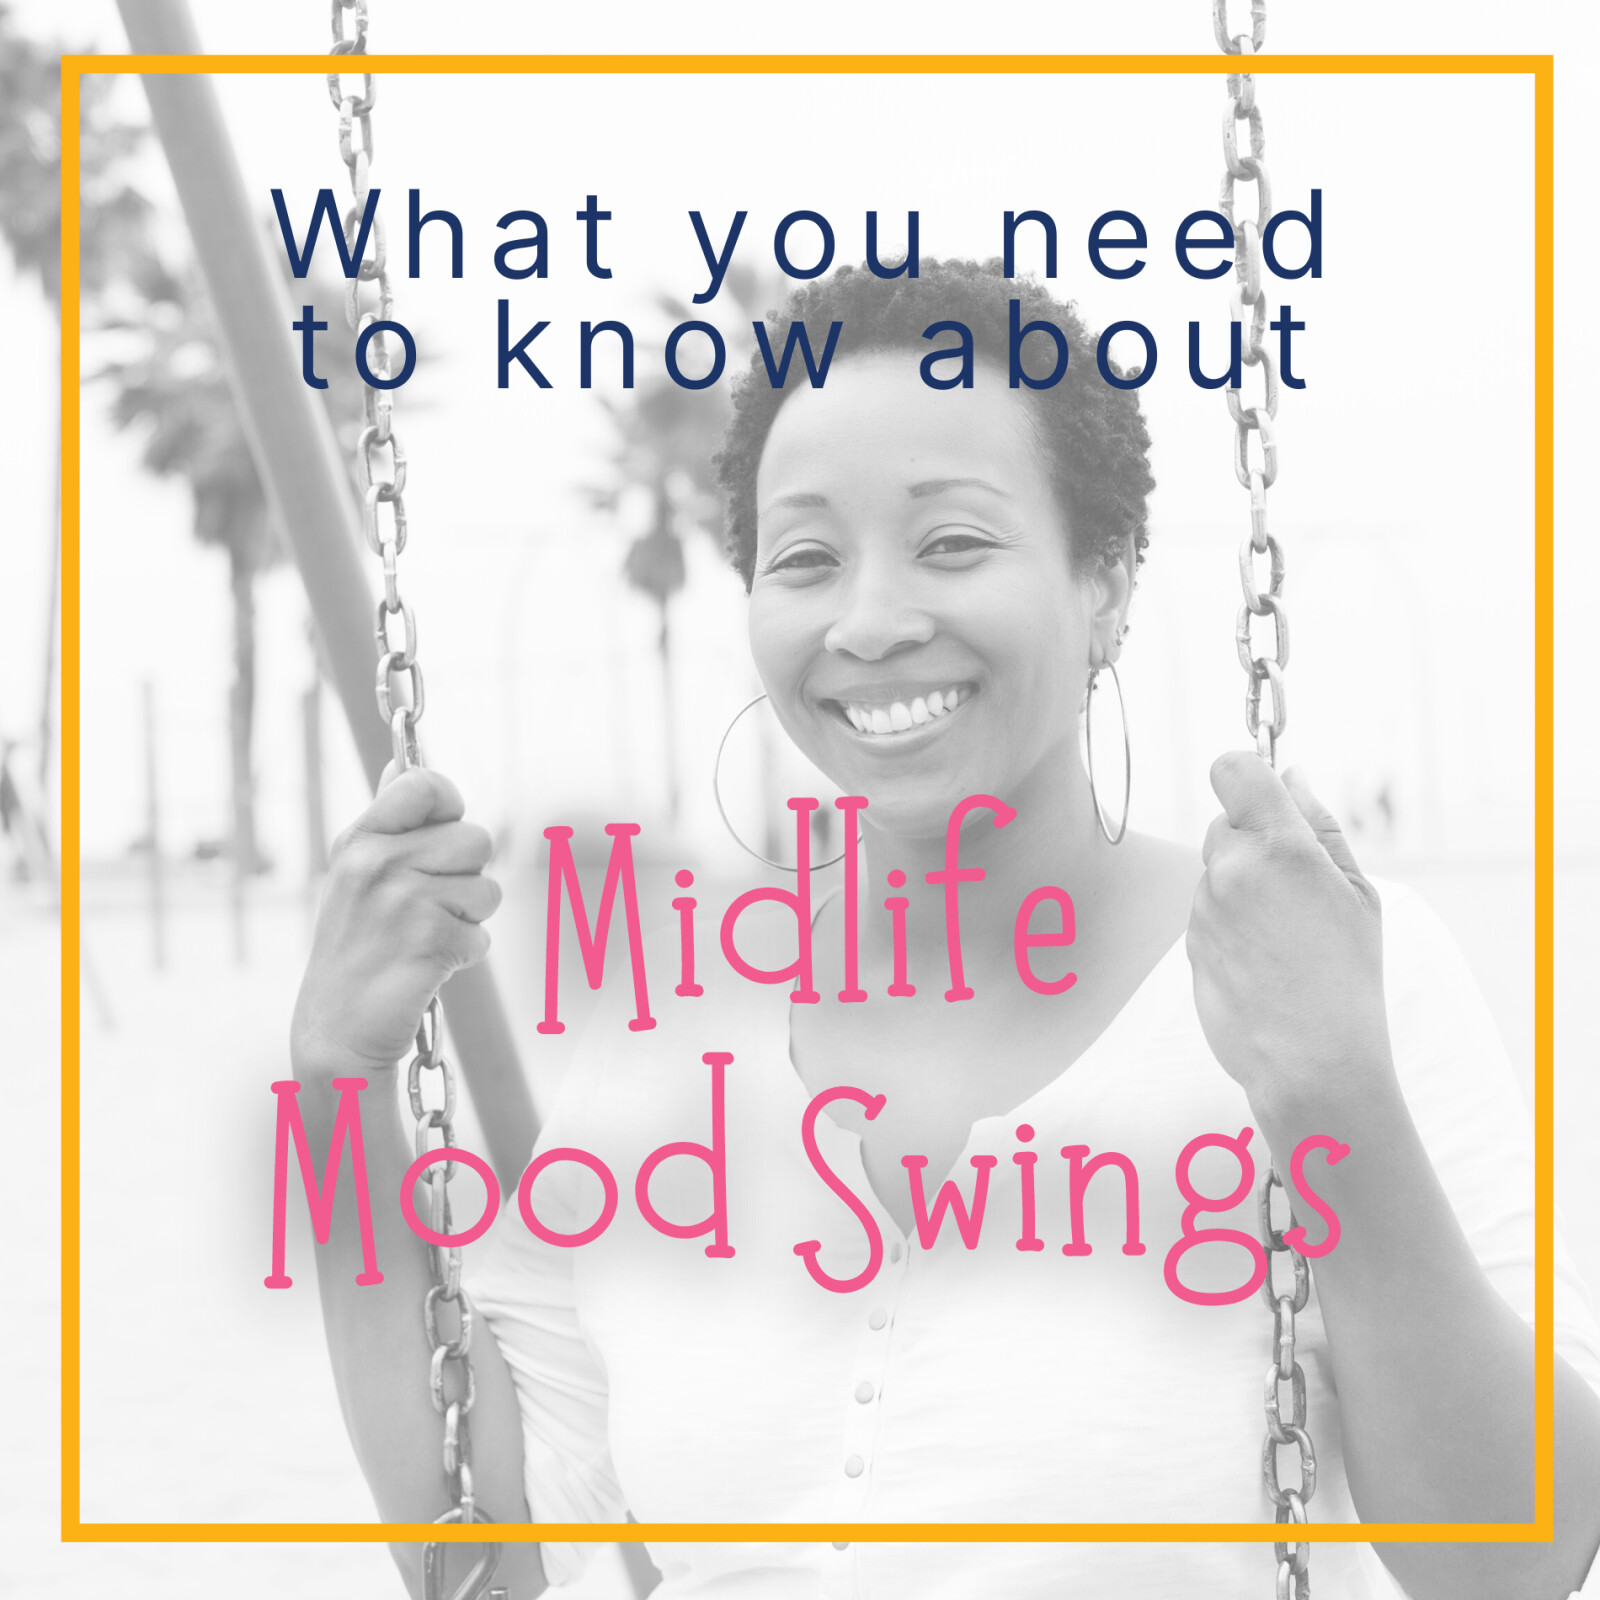 What You Need to Know About Midlife Mood Swings